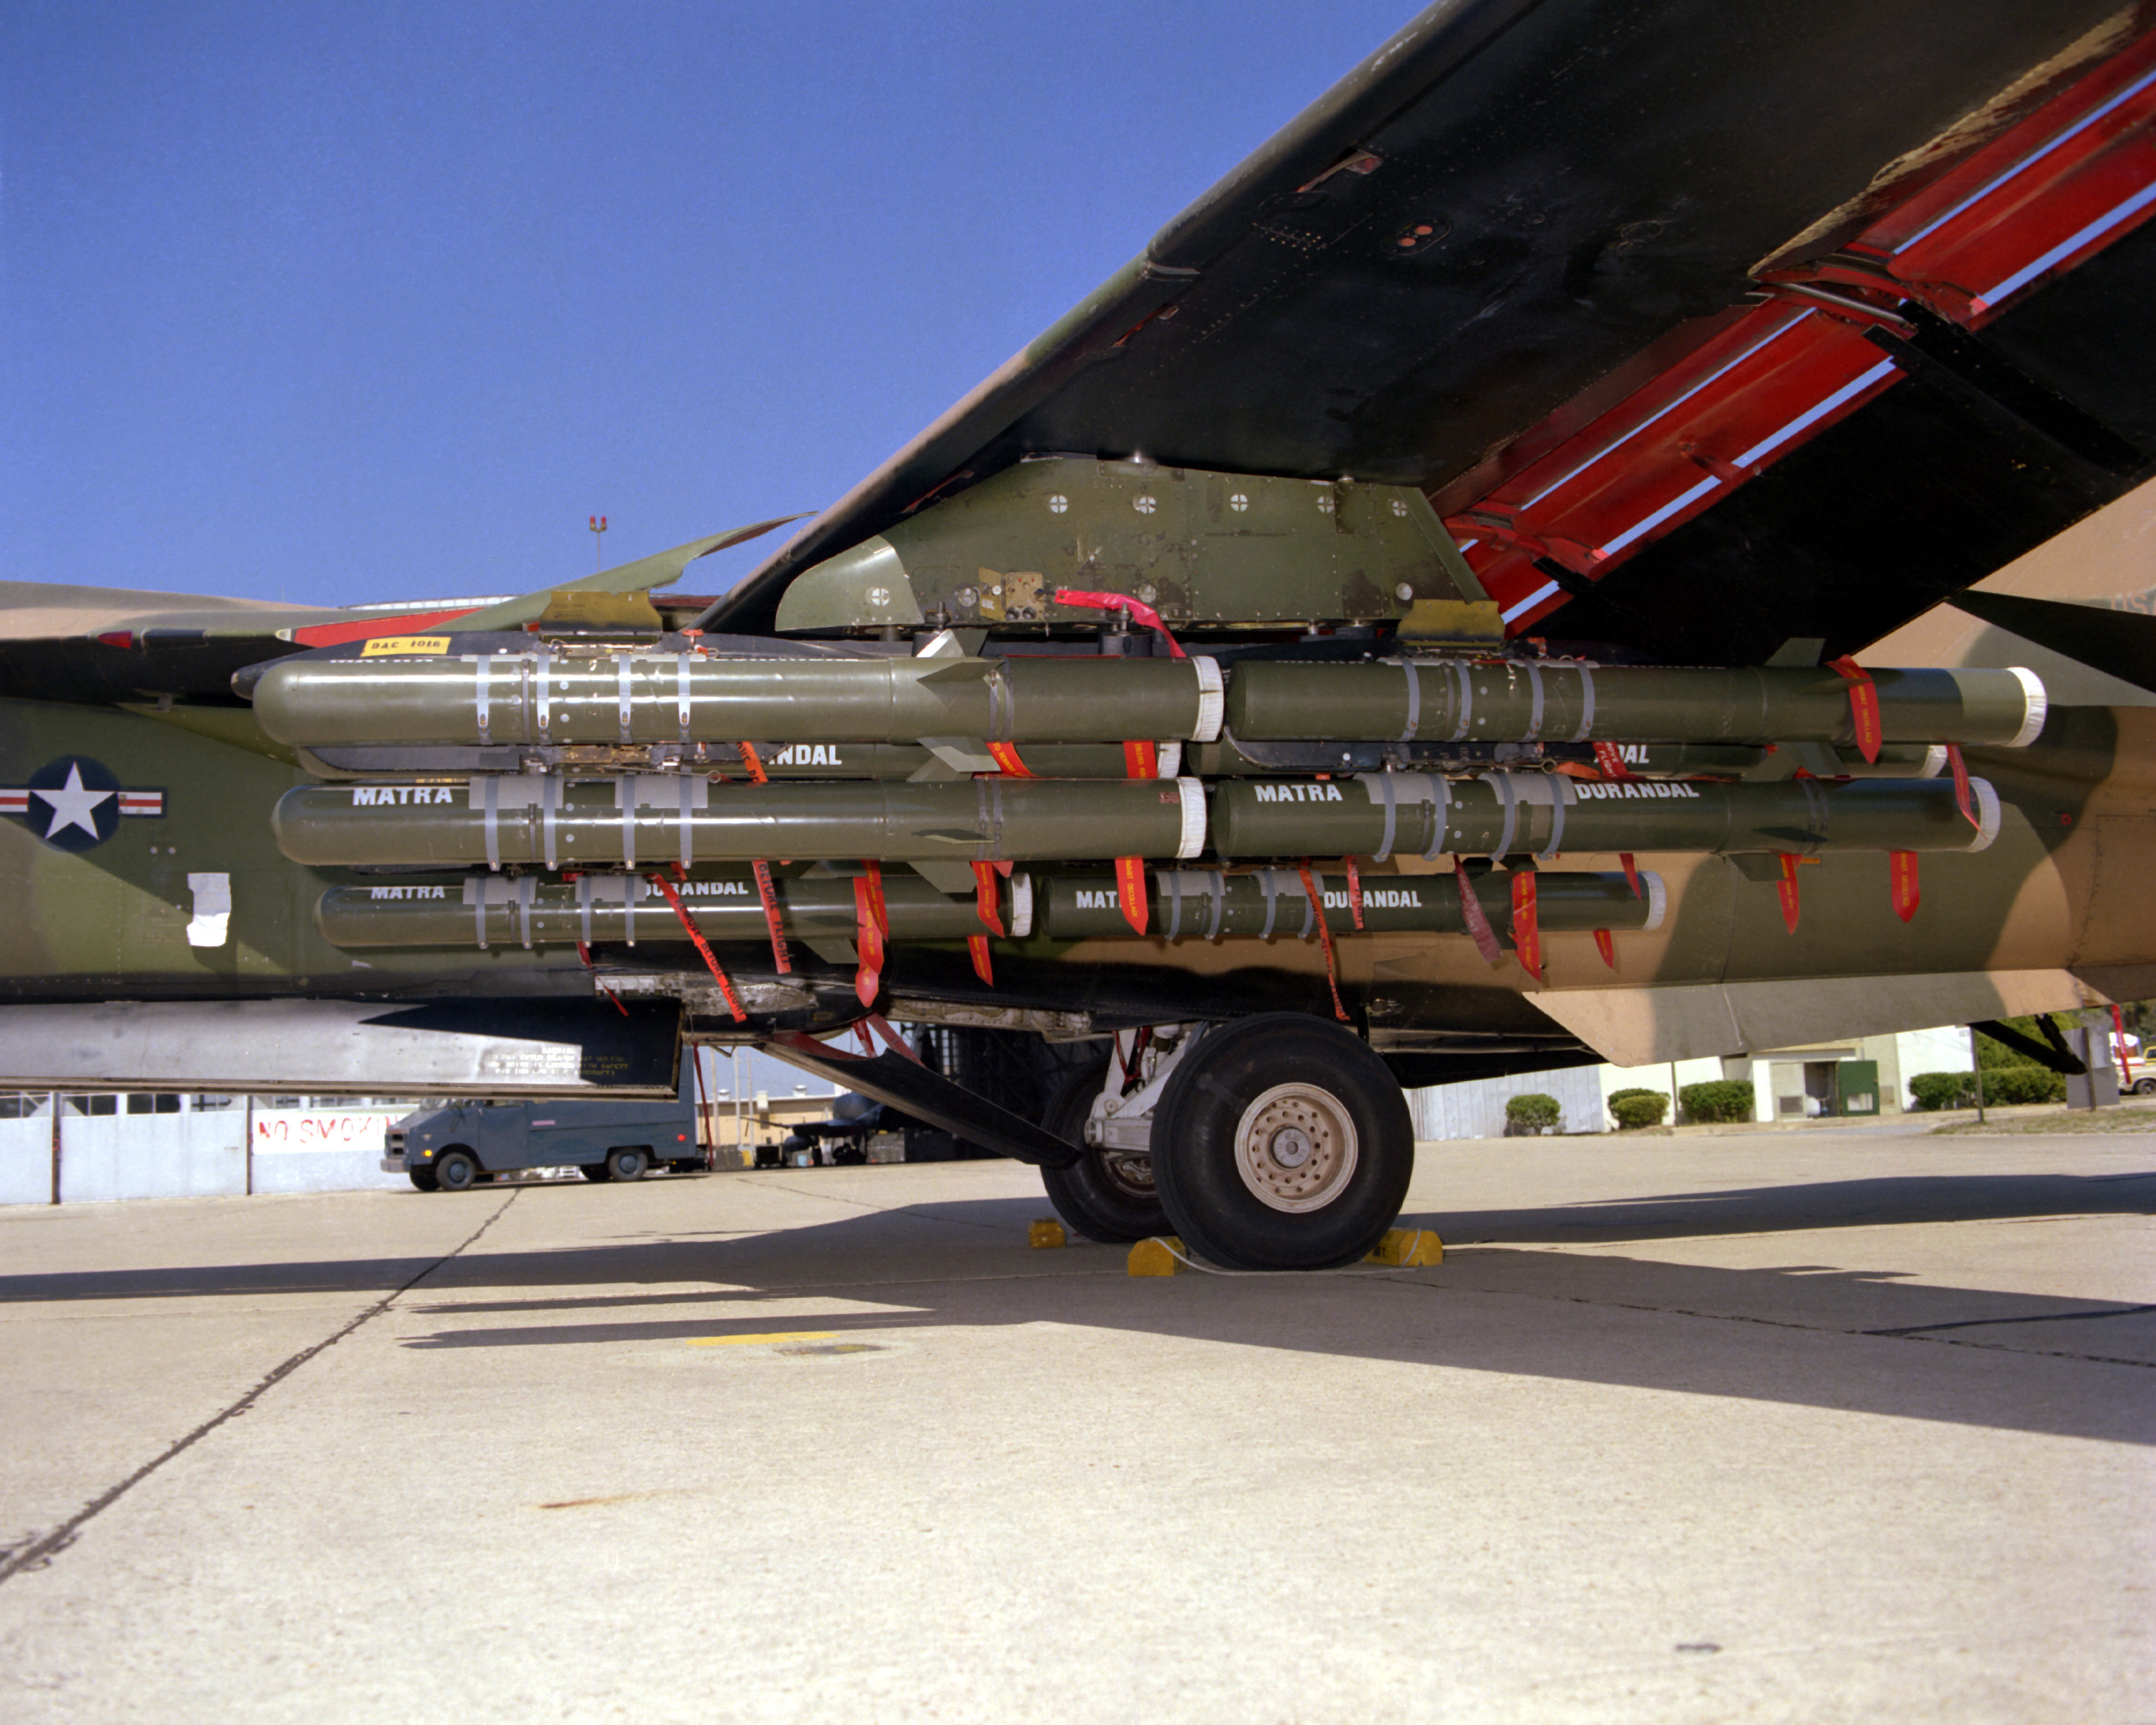 F-111_with_Durandal.jpg